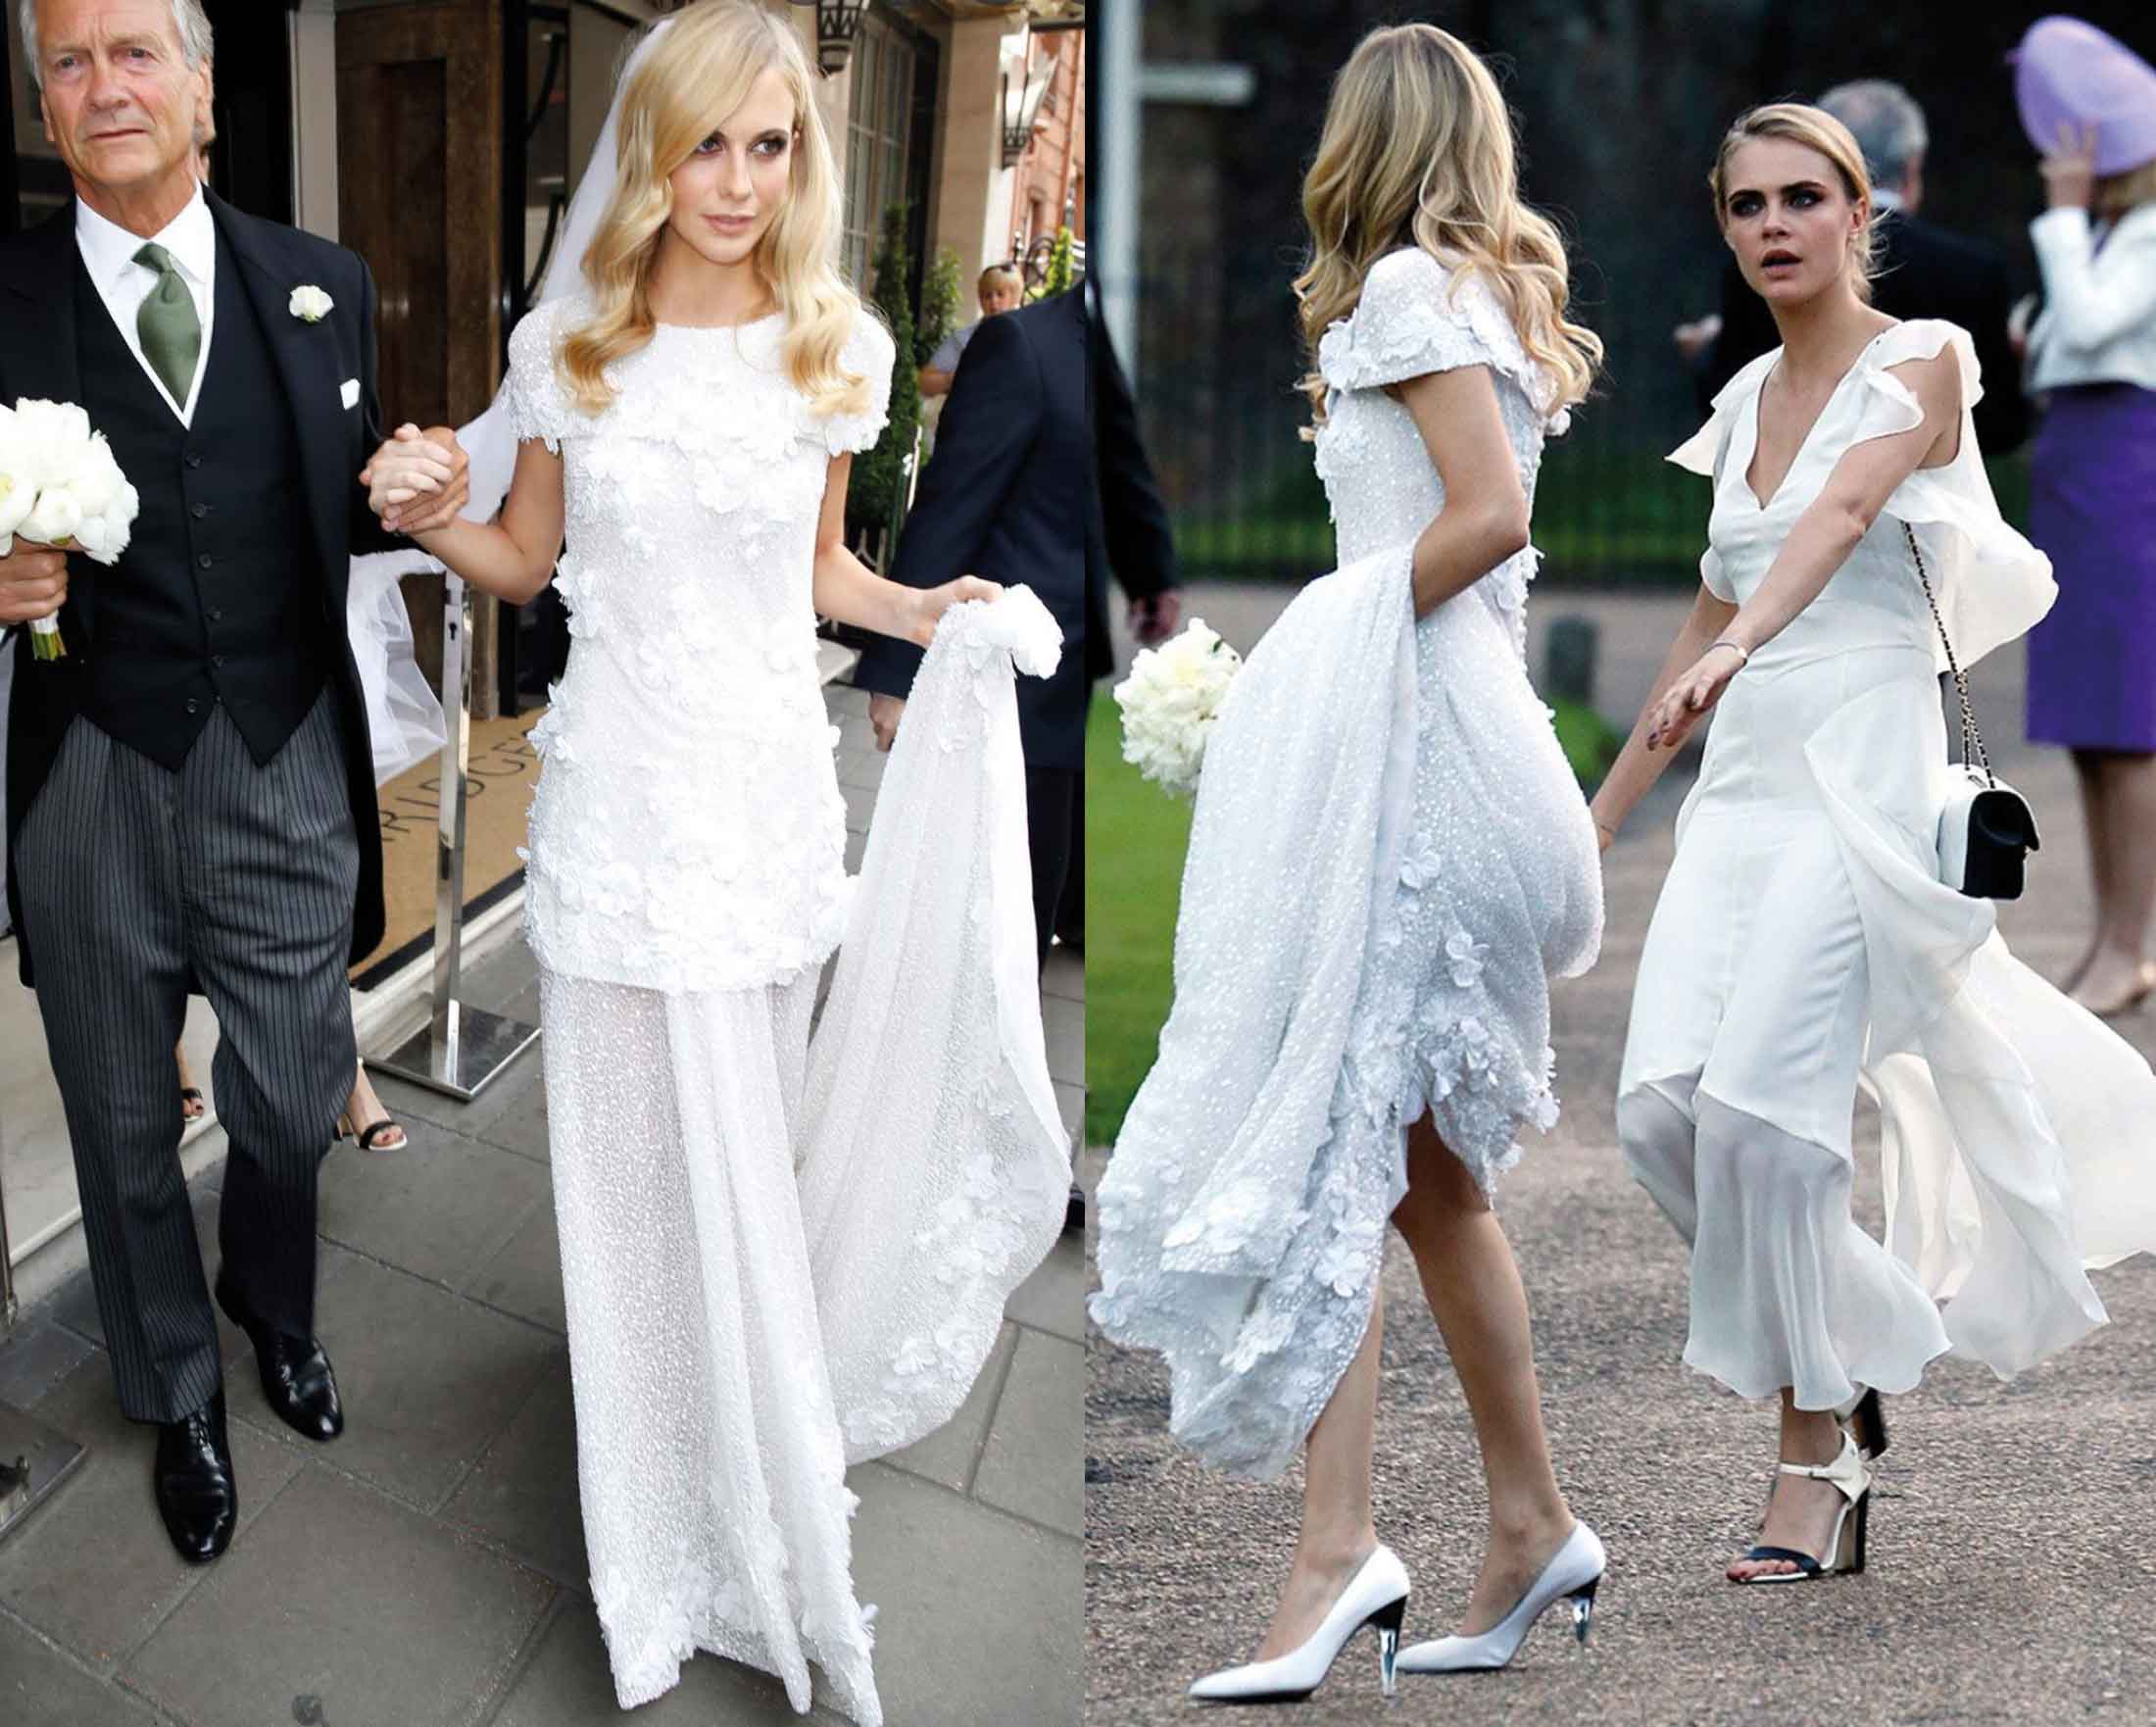 Cara Delevingne's Chanel bridesmaid dress for a fraction of the price